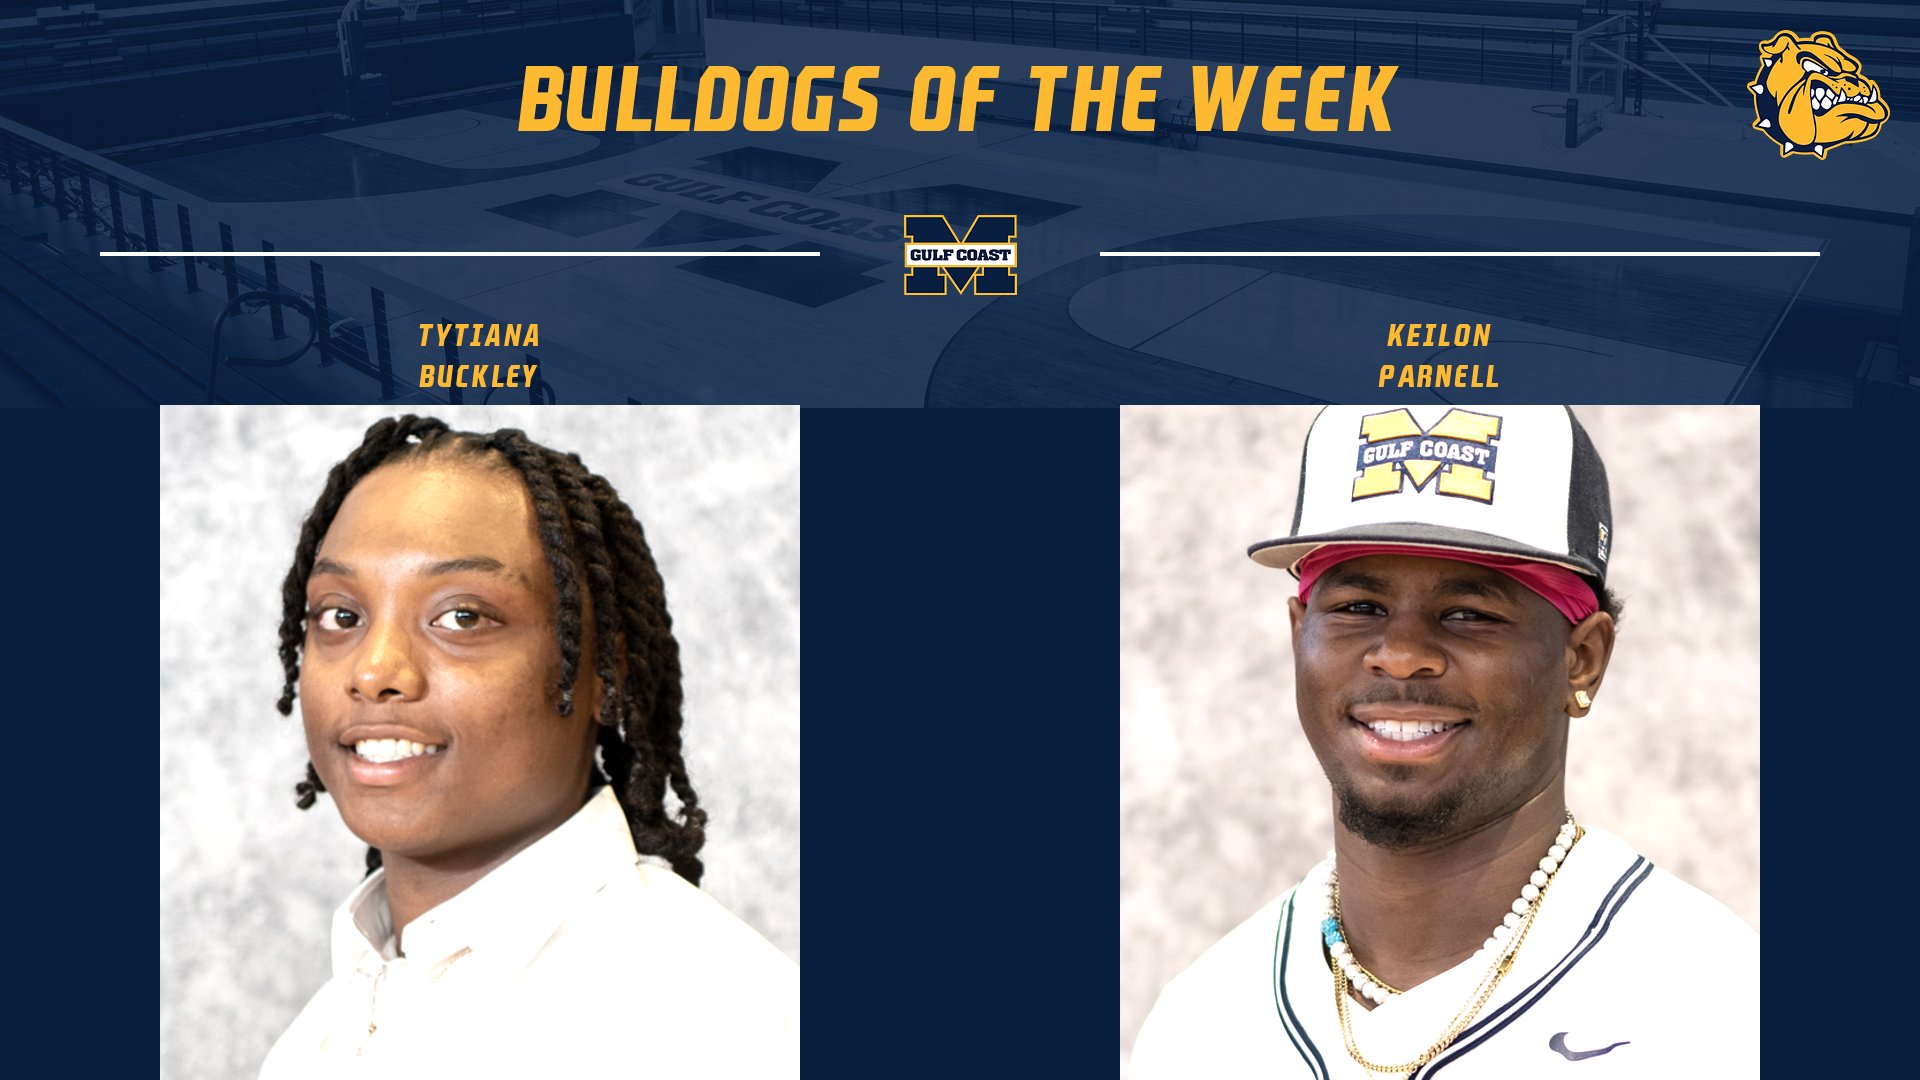 Buckley, Parnell named Bulldogs of the Week